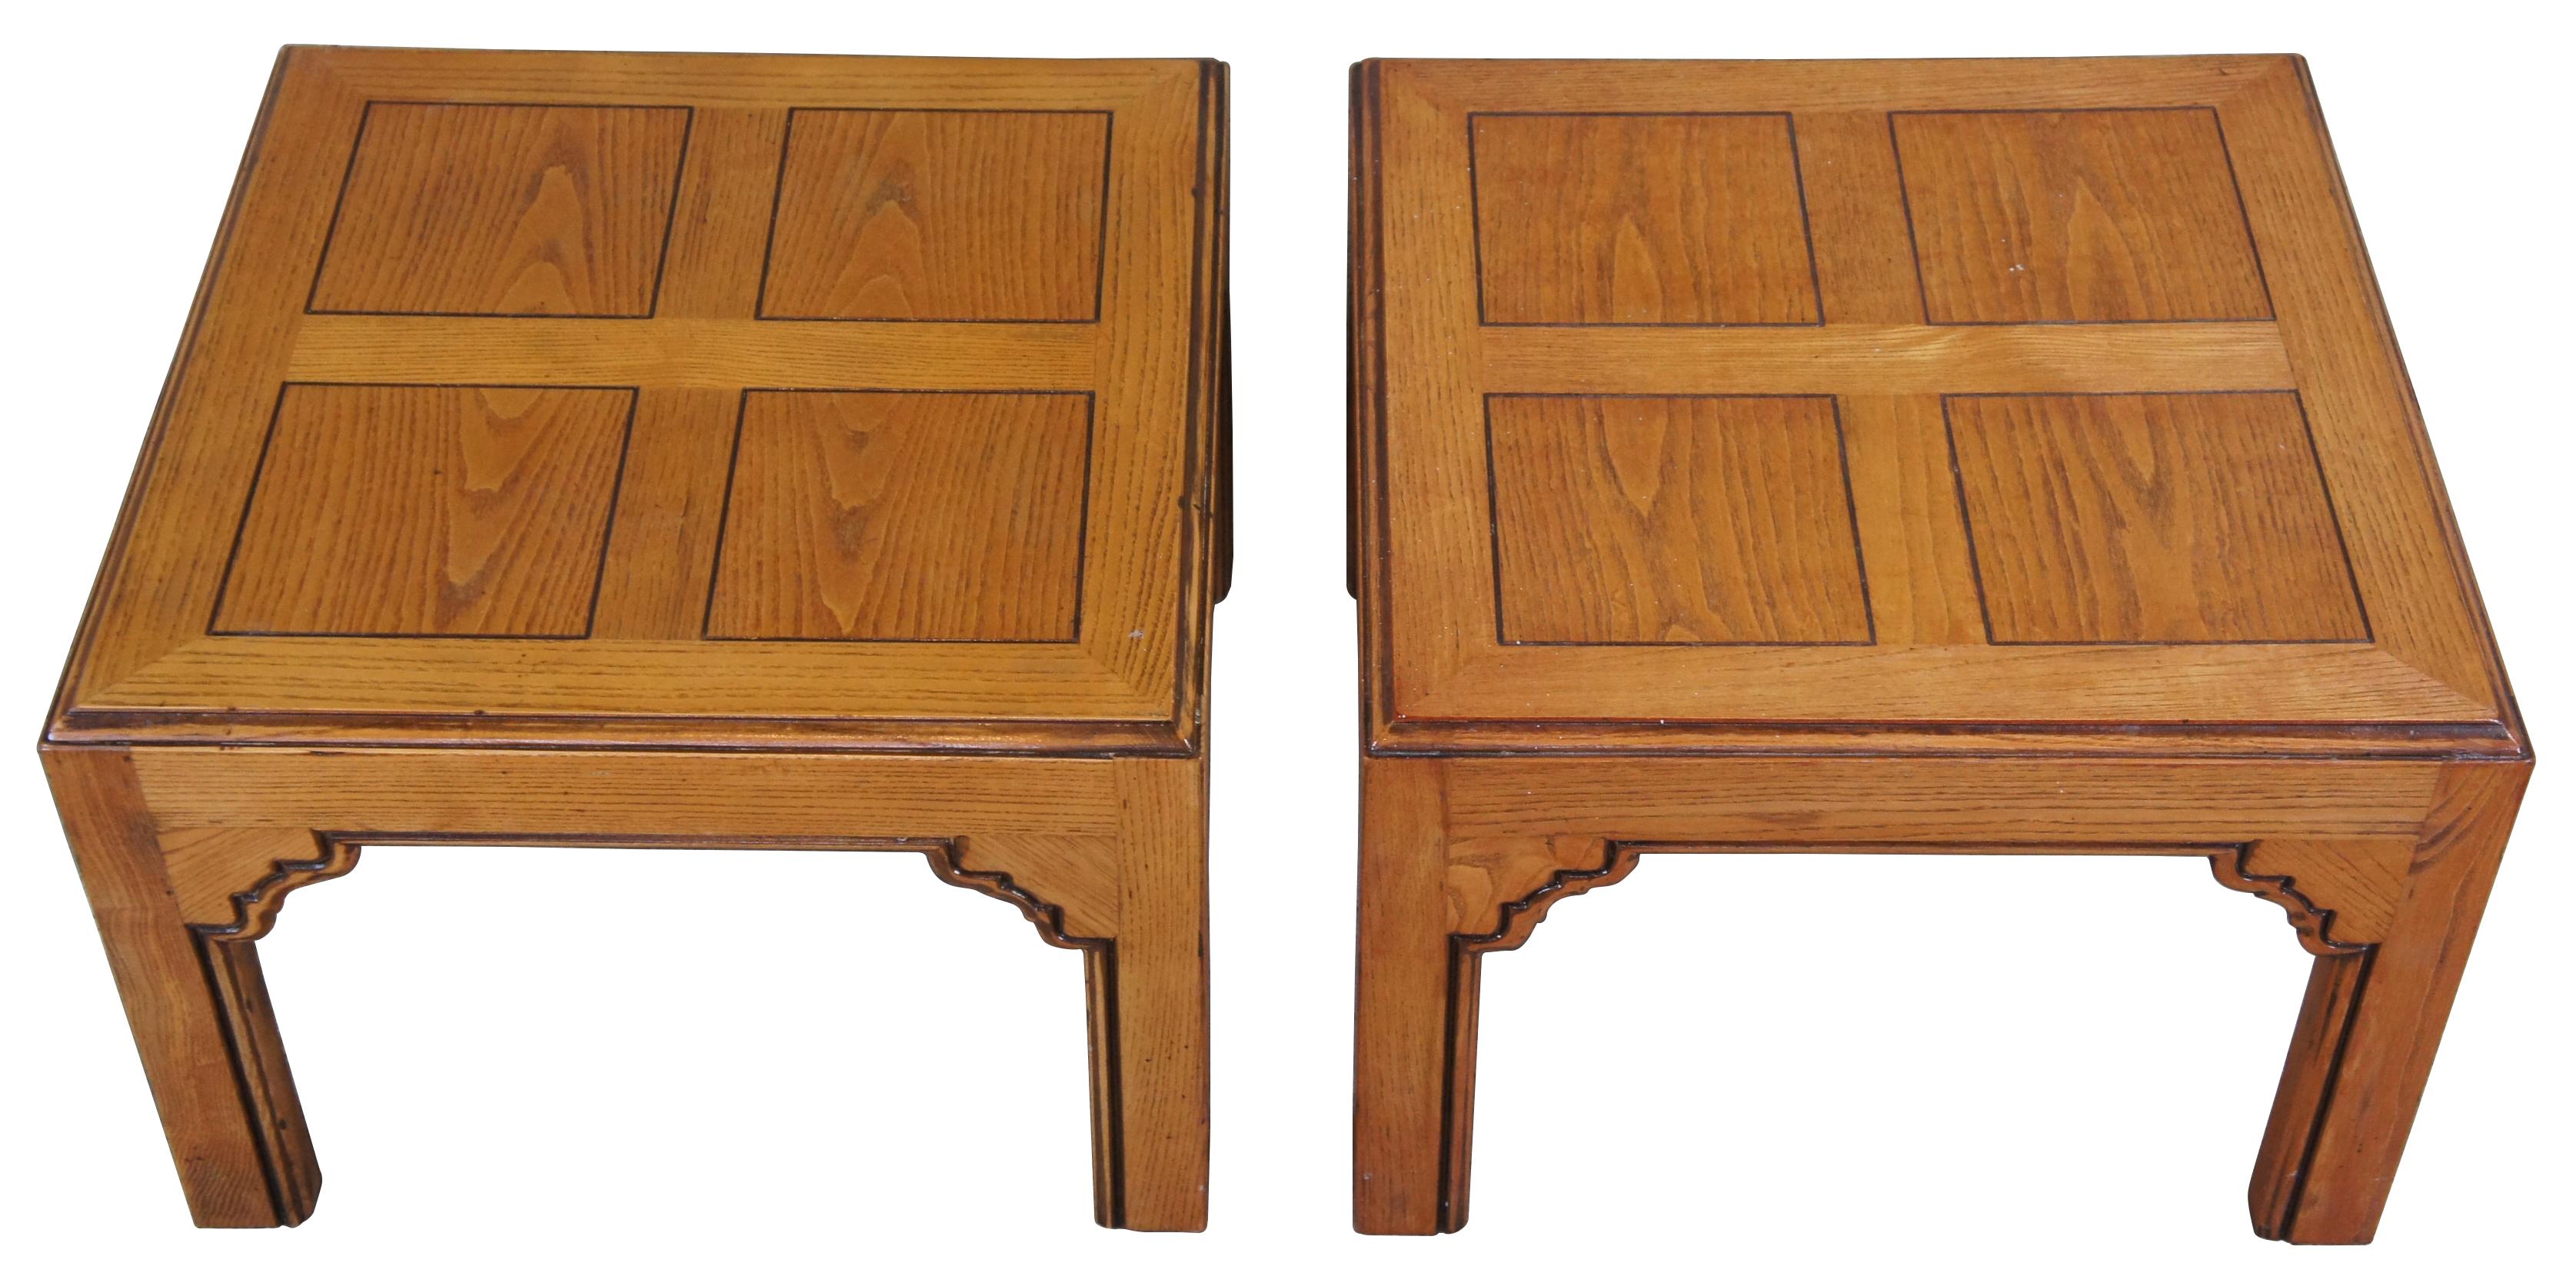 2 Henredon Four Centuries side tables, circa 1970s. Made from solid oak with a square form and panelled top over straight legs.